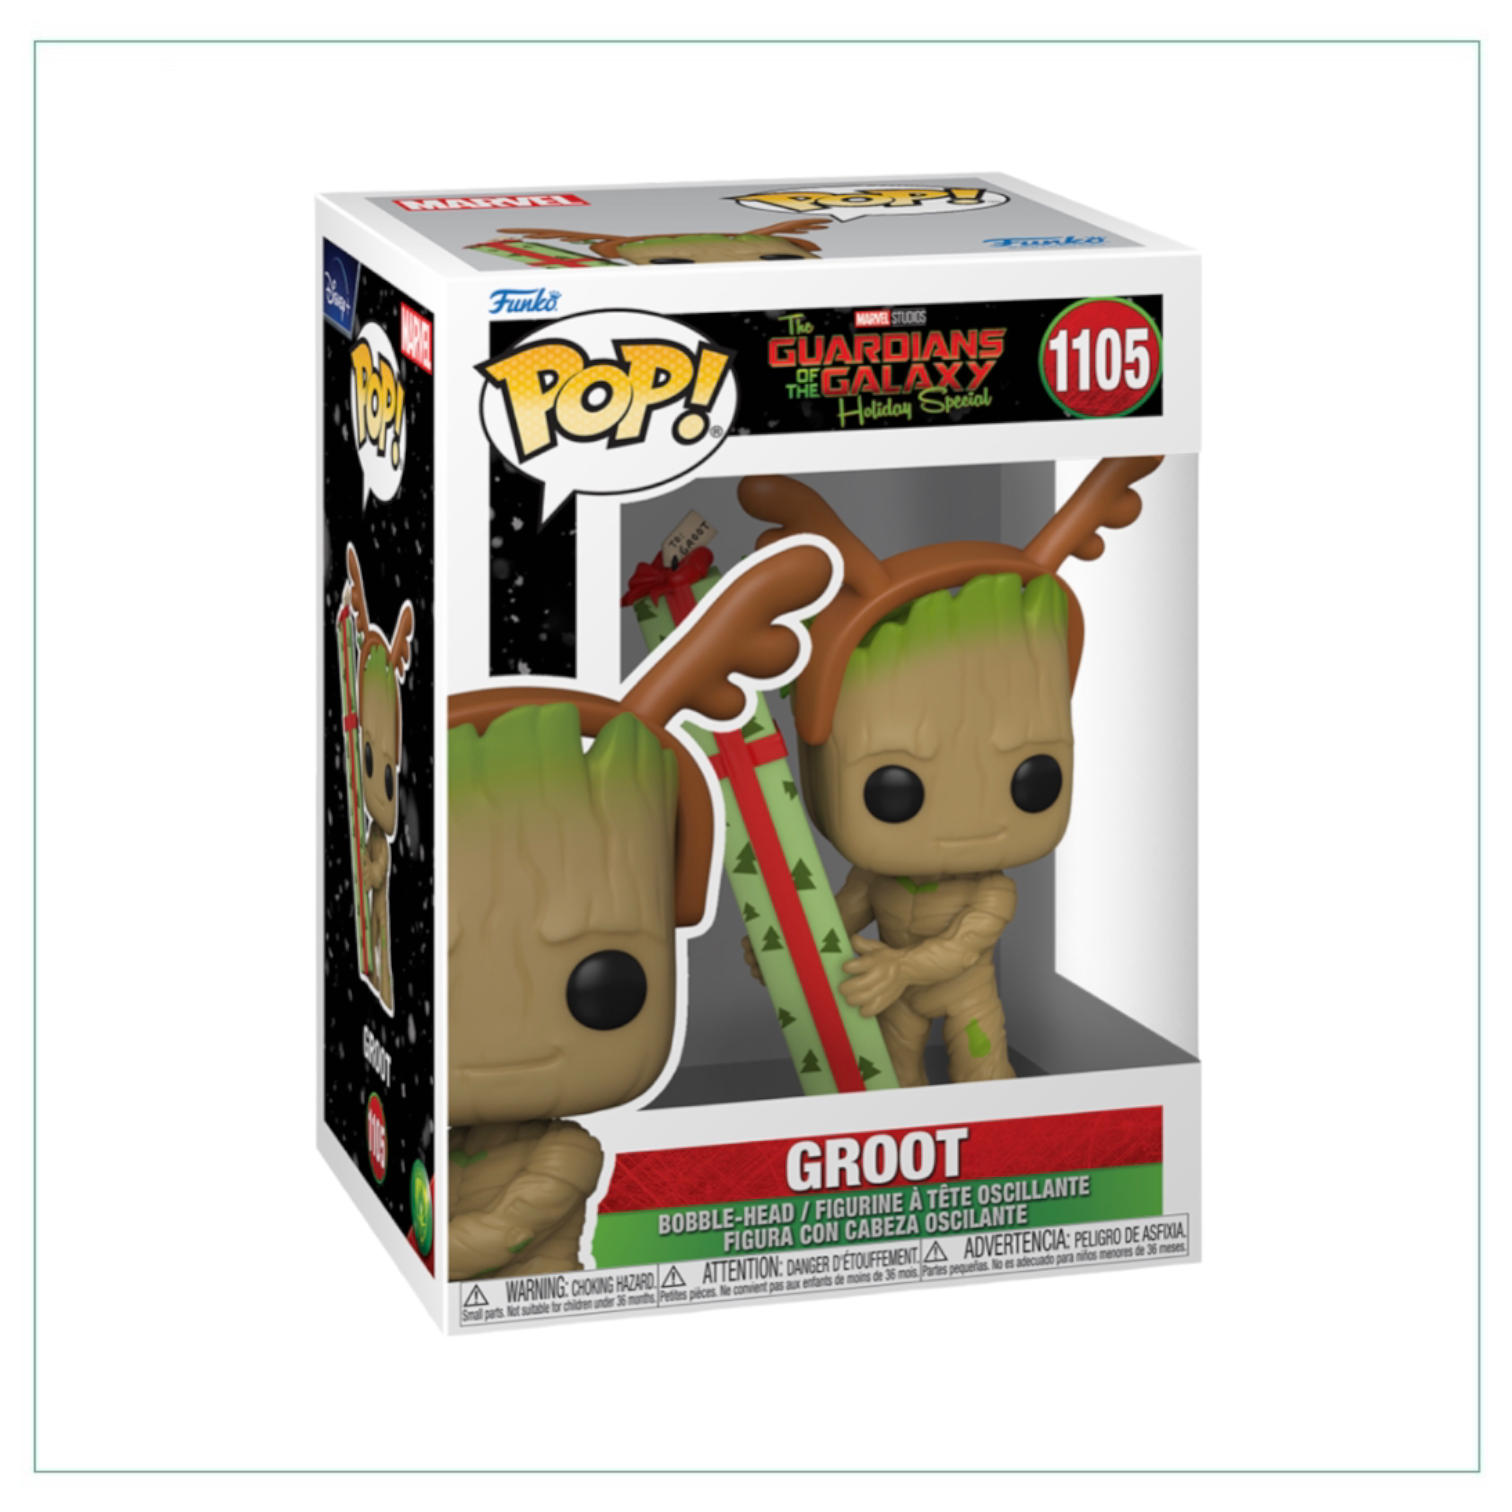 Groot #1105 Funko Pop! Guardians of the Galaxy Holiday Special